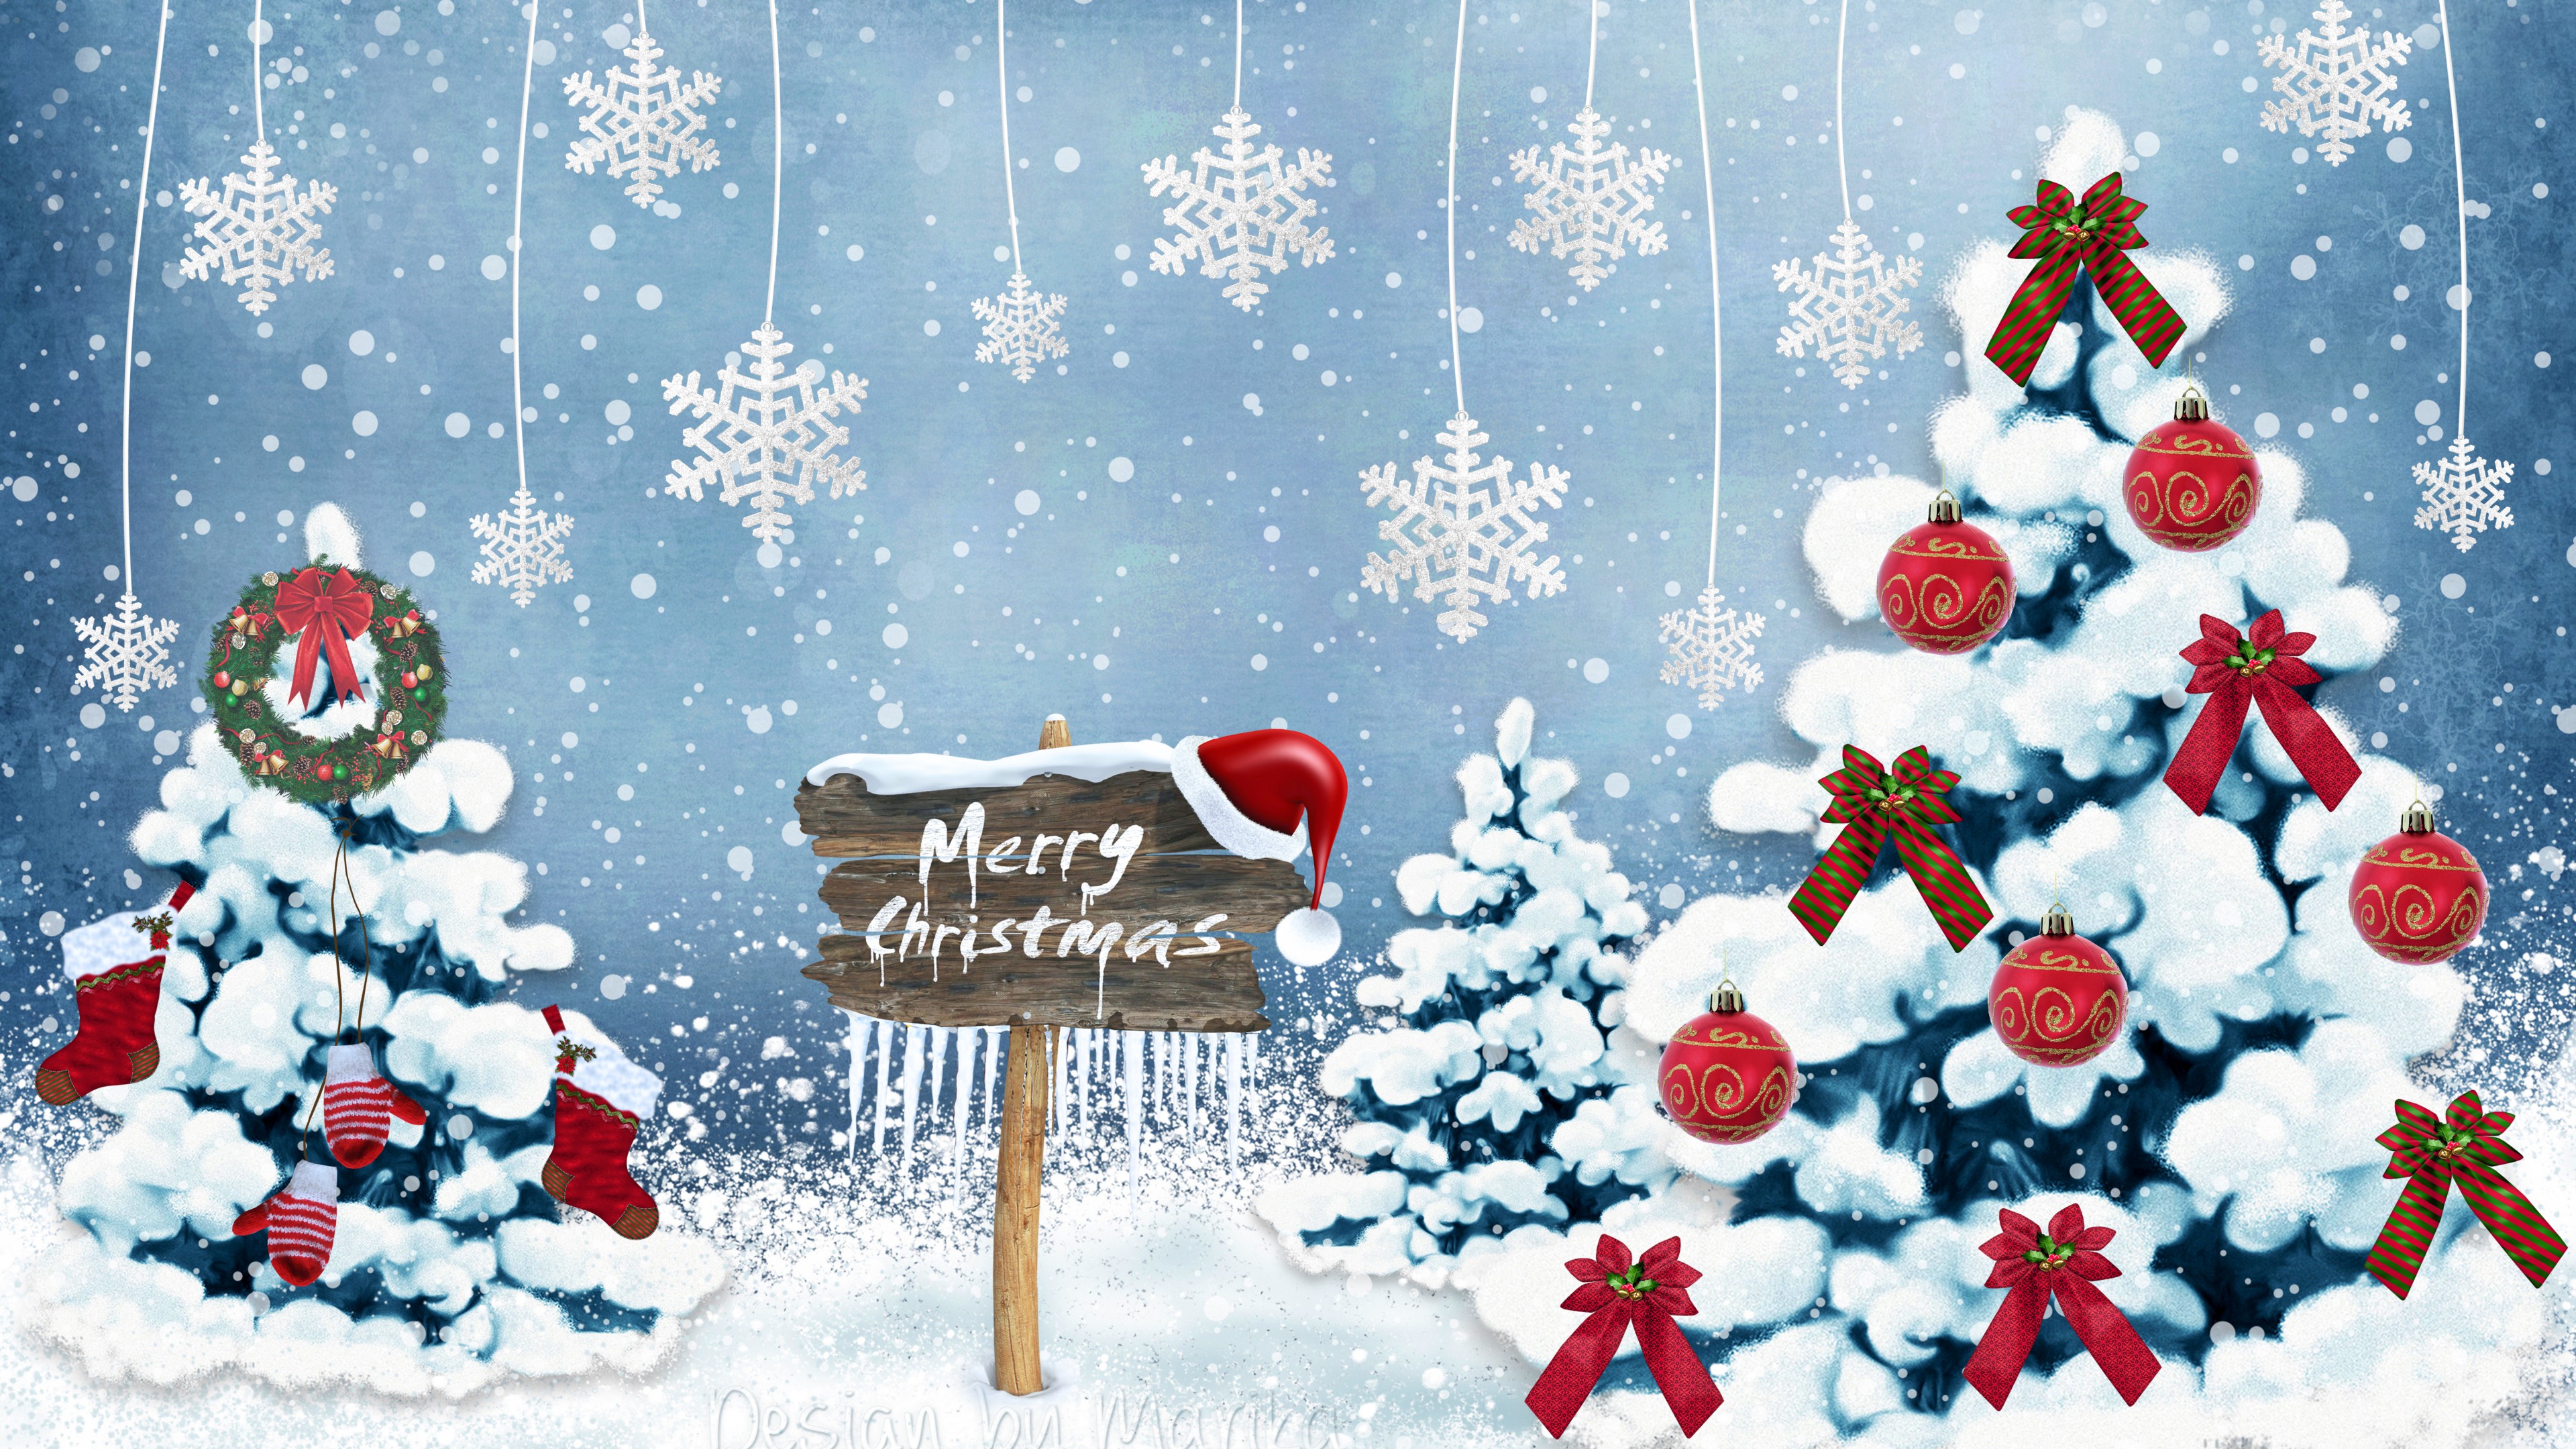 Free download Merry Christmas Free Hd Wallpaper For Download Merry